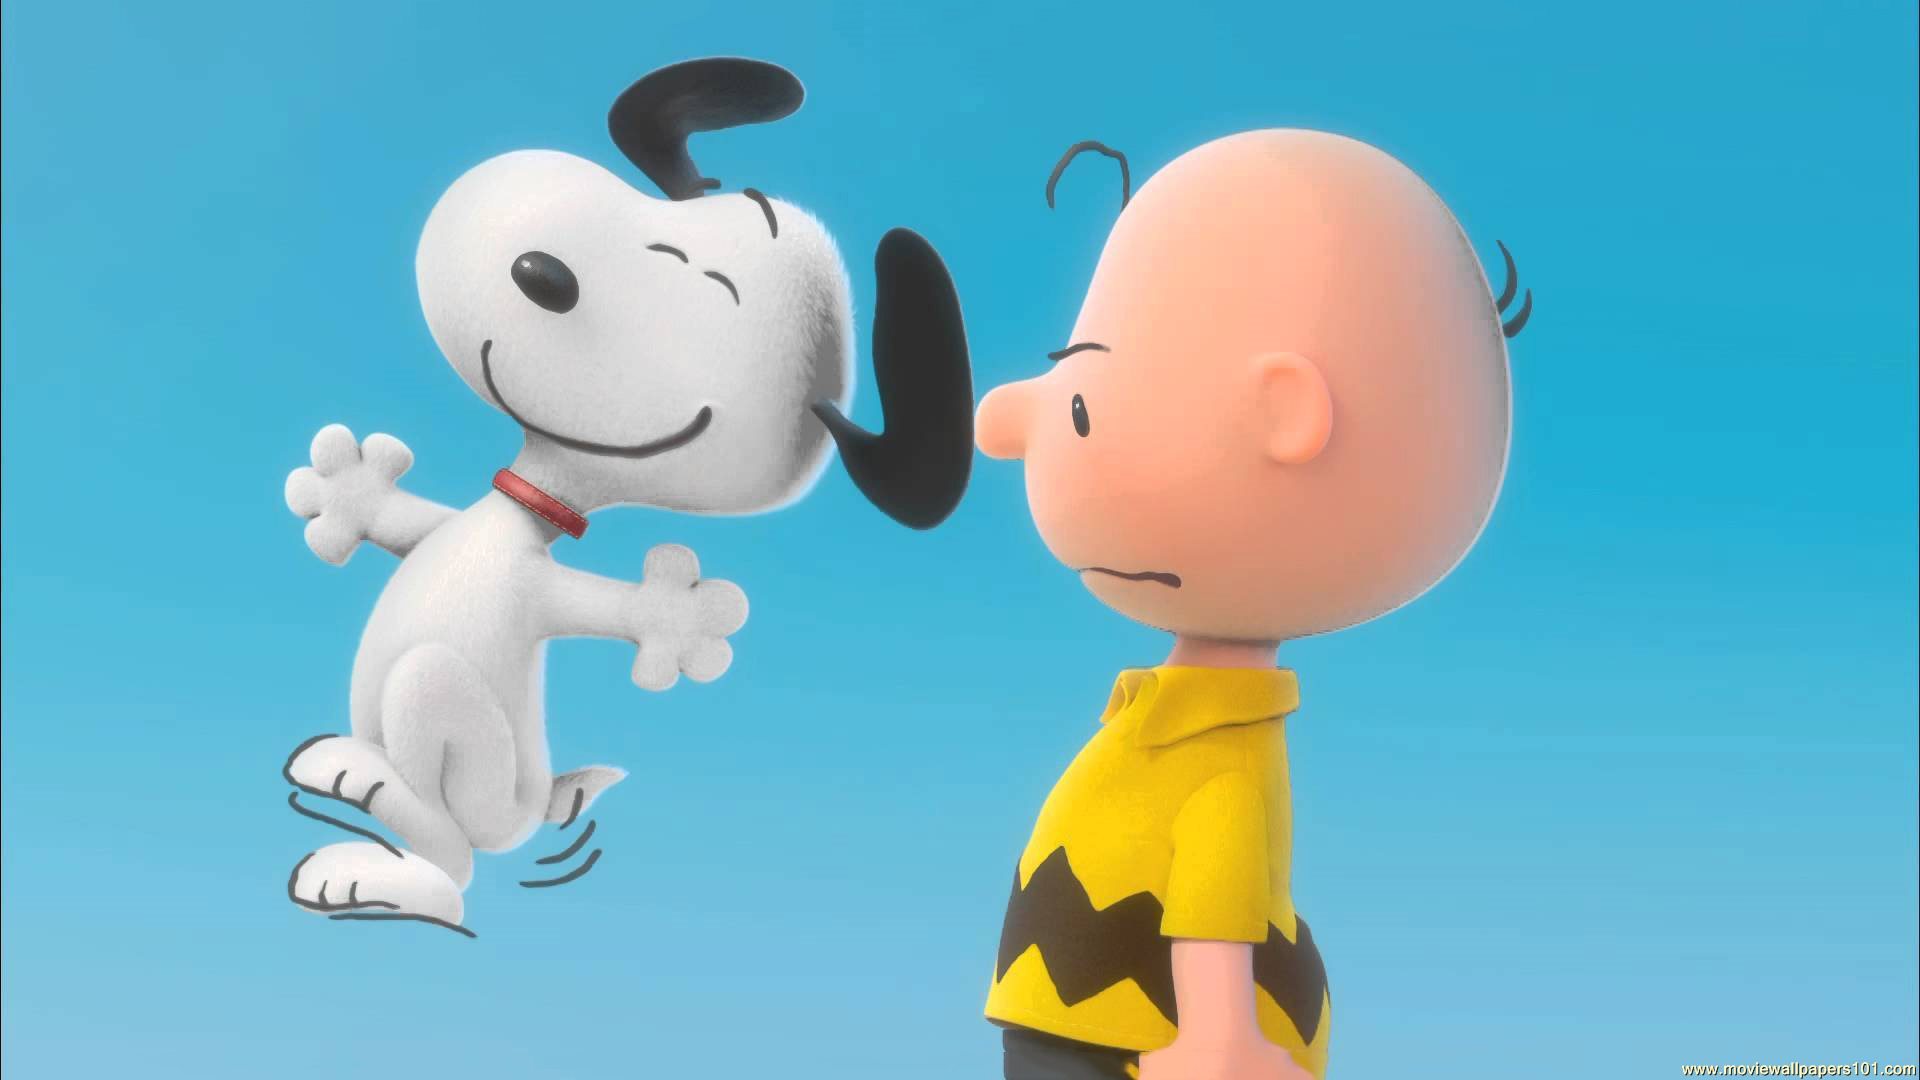 Free Download The Peanuts 2015 Movie Hd Wallpaper Stylish Hd Wallpapers [1920x1080] For Your